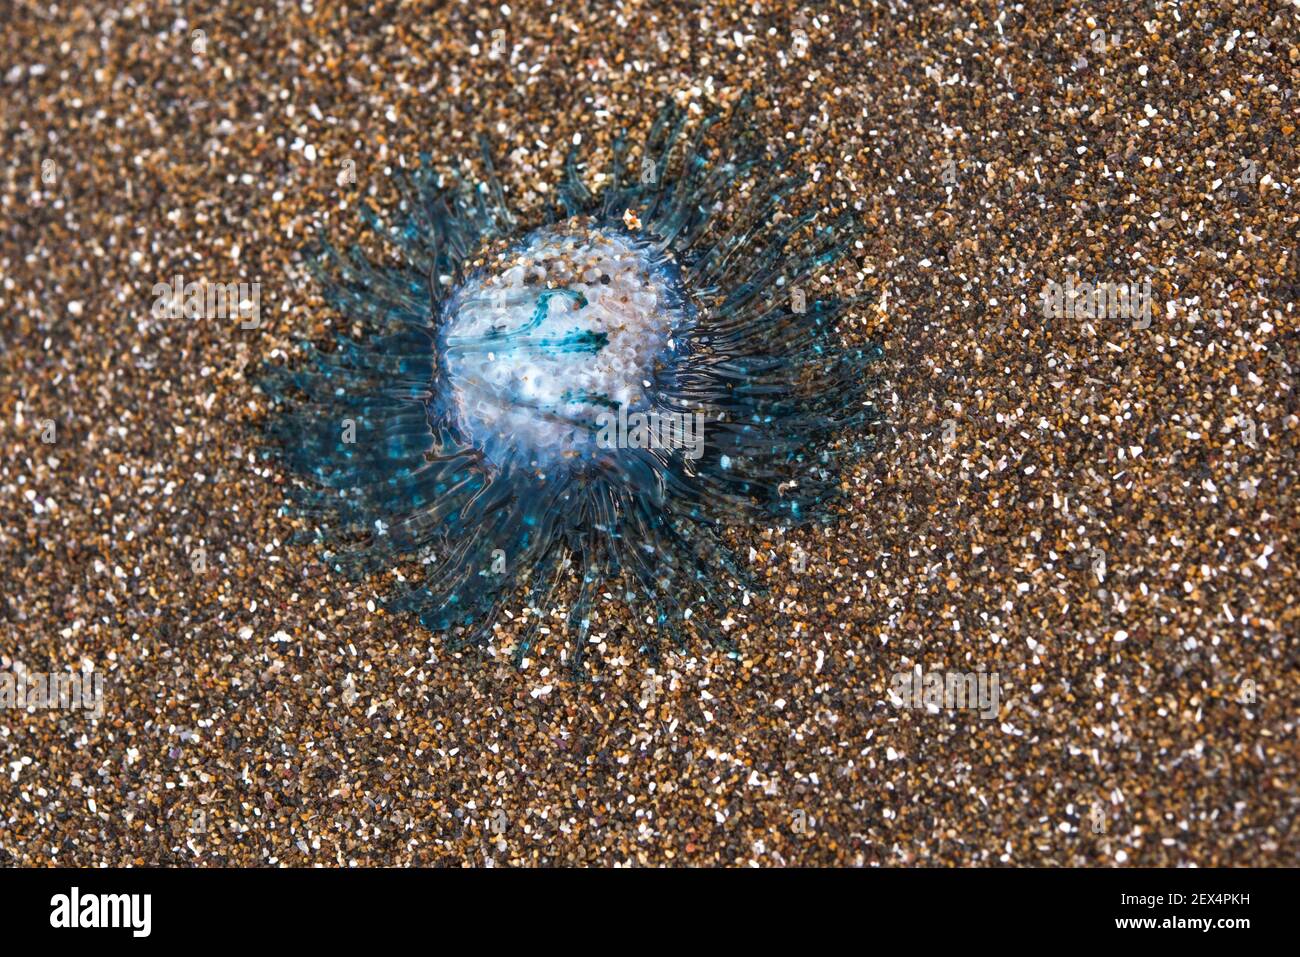 BLUE BUTTON (Porpita porpita). Pelagic hydrozoan that lives floating and drifting on the surface of the oceans. They can also appear stranded on the c Stock Photo